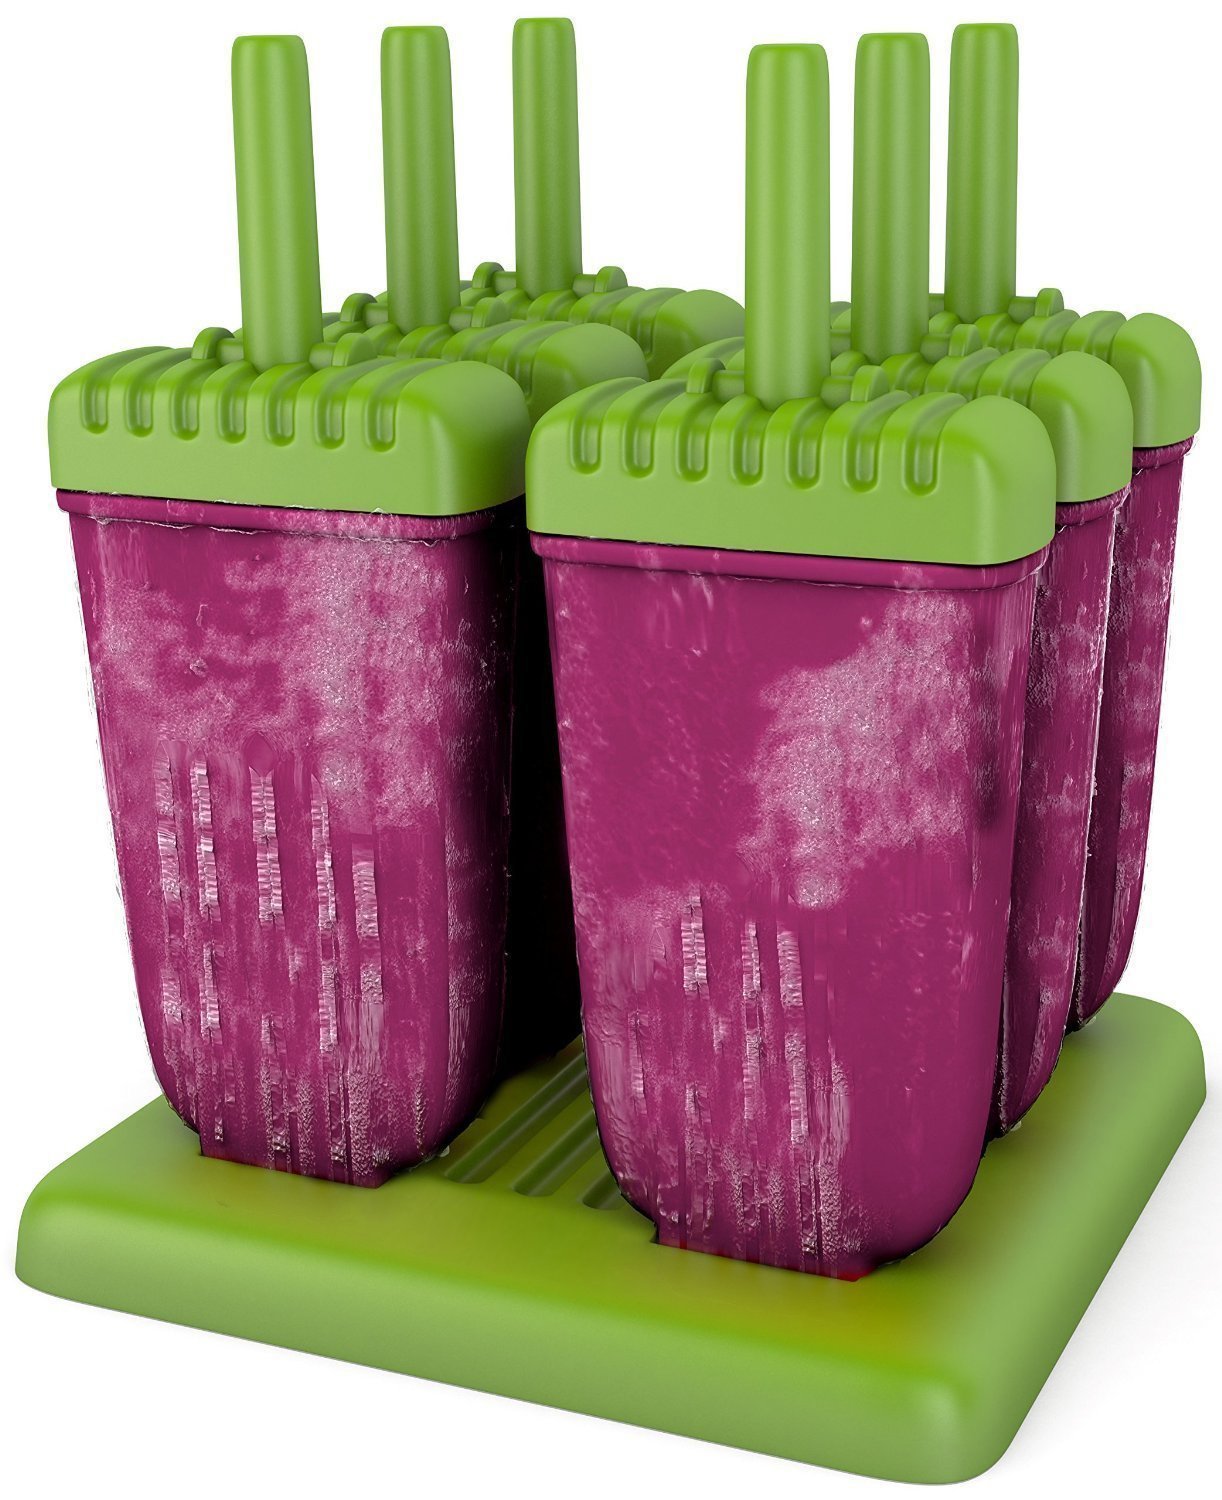 Gogogu Popsicle Molds Just $7.99! Must-Have for Summer!